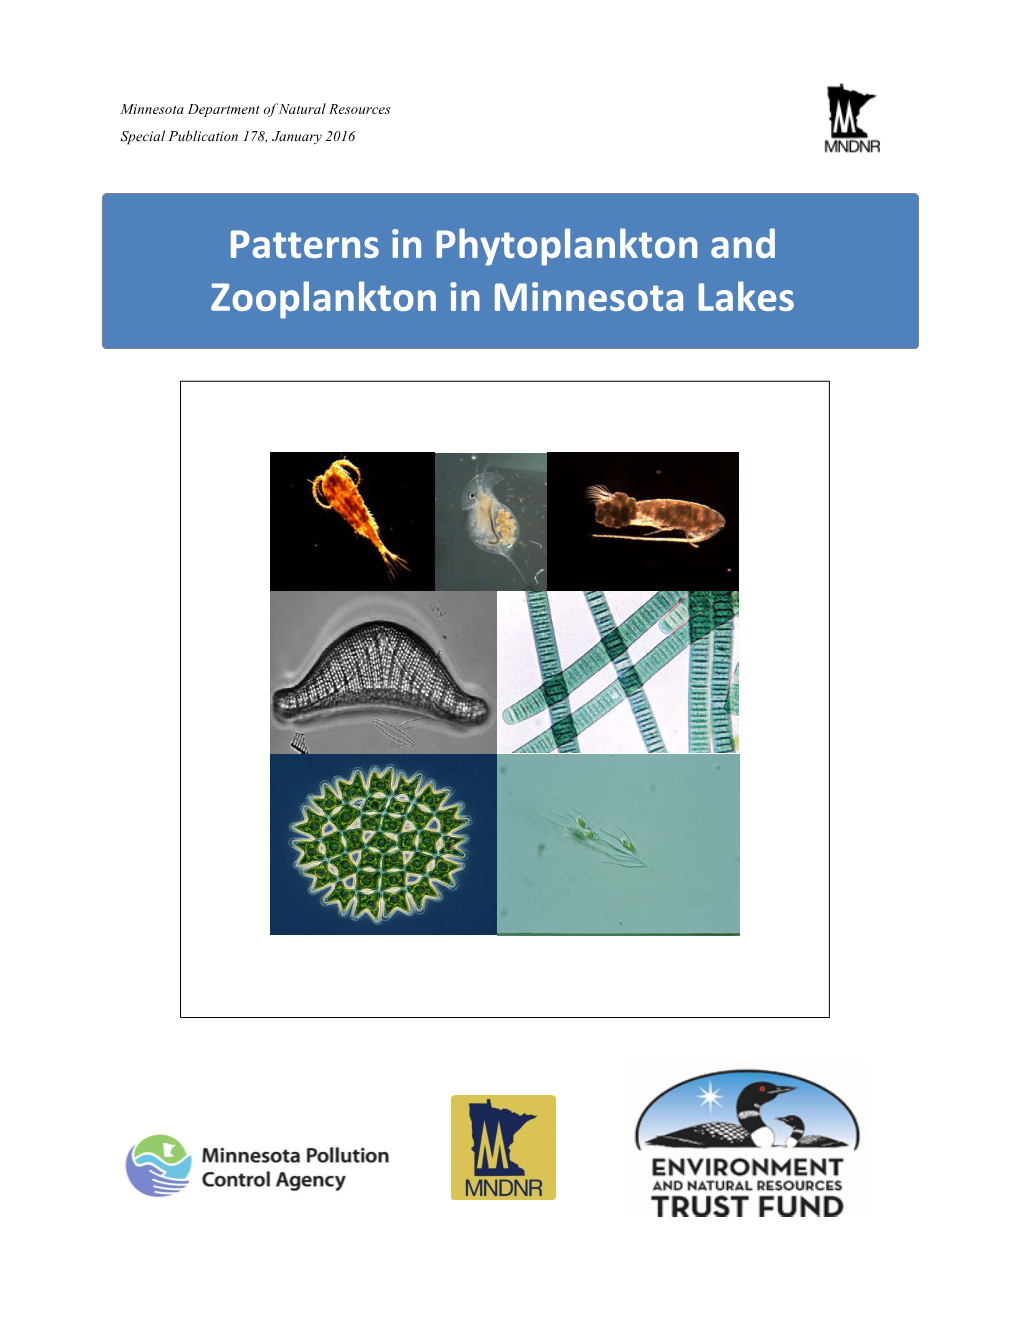 Patterns in Phytoplankton and Zooplankton in Minnesota Lakes